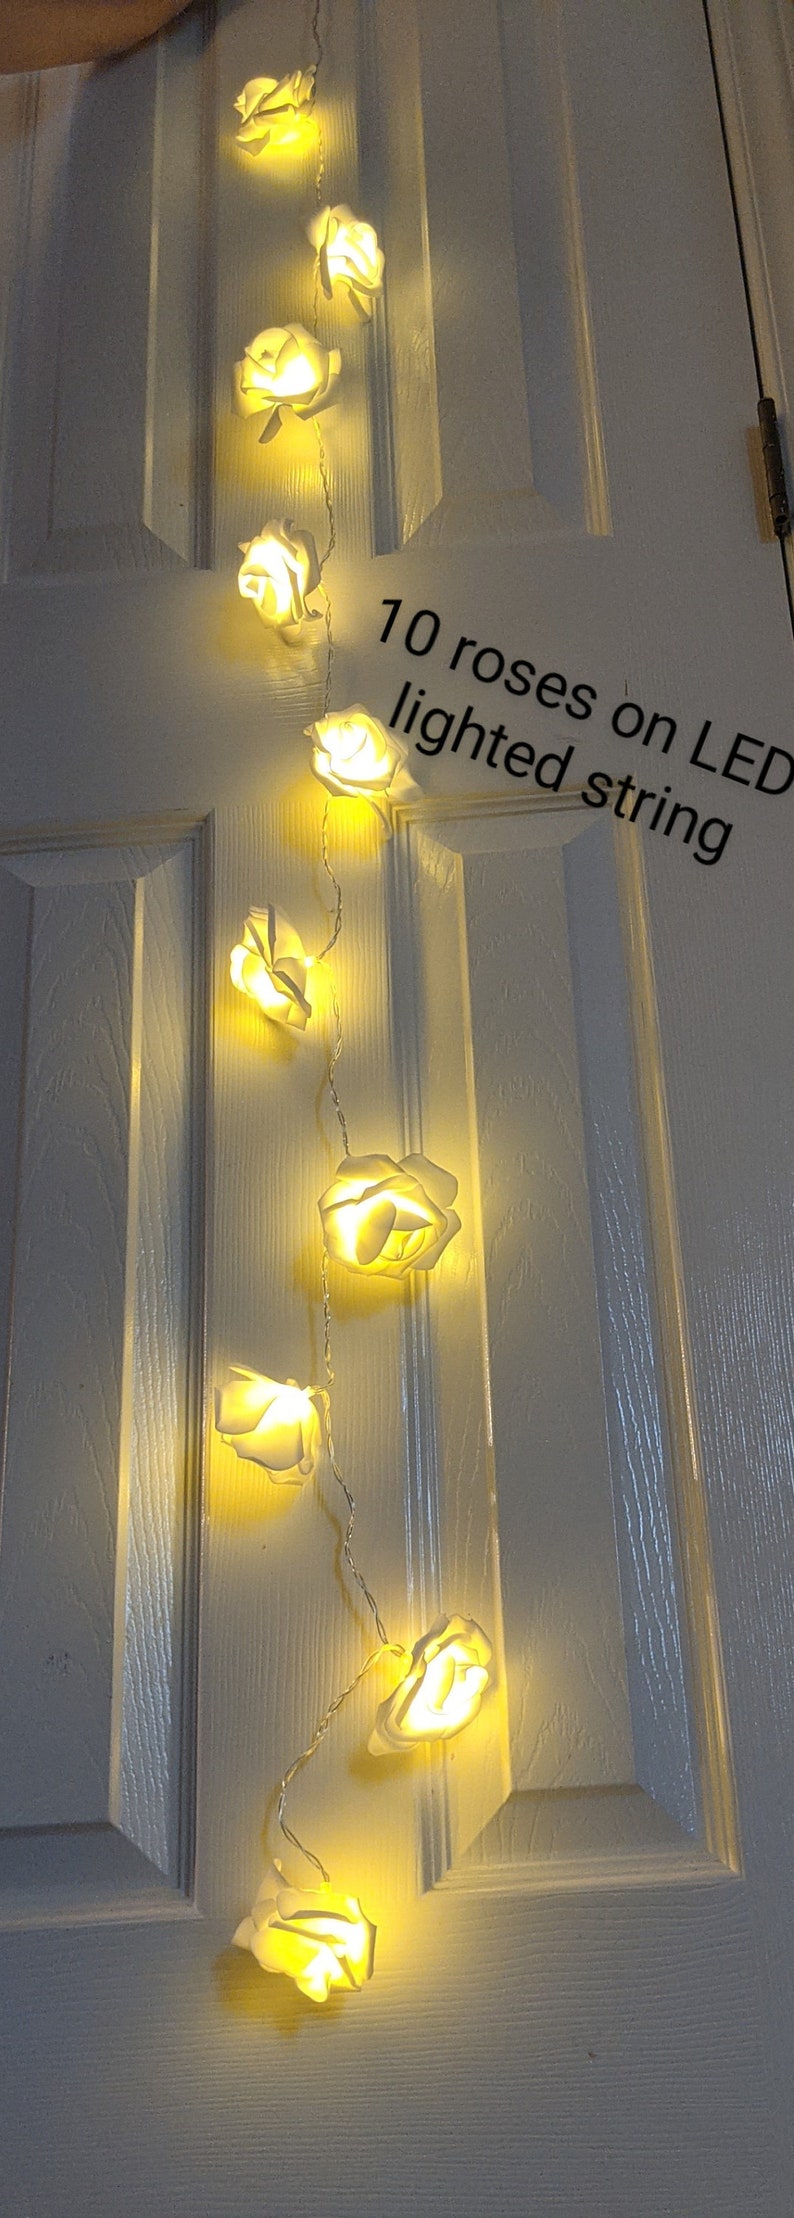 Rose petal LED String Lights, Battery operated Fairy lights for Indoor or patio image 3